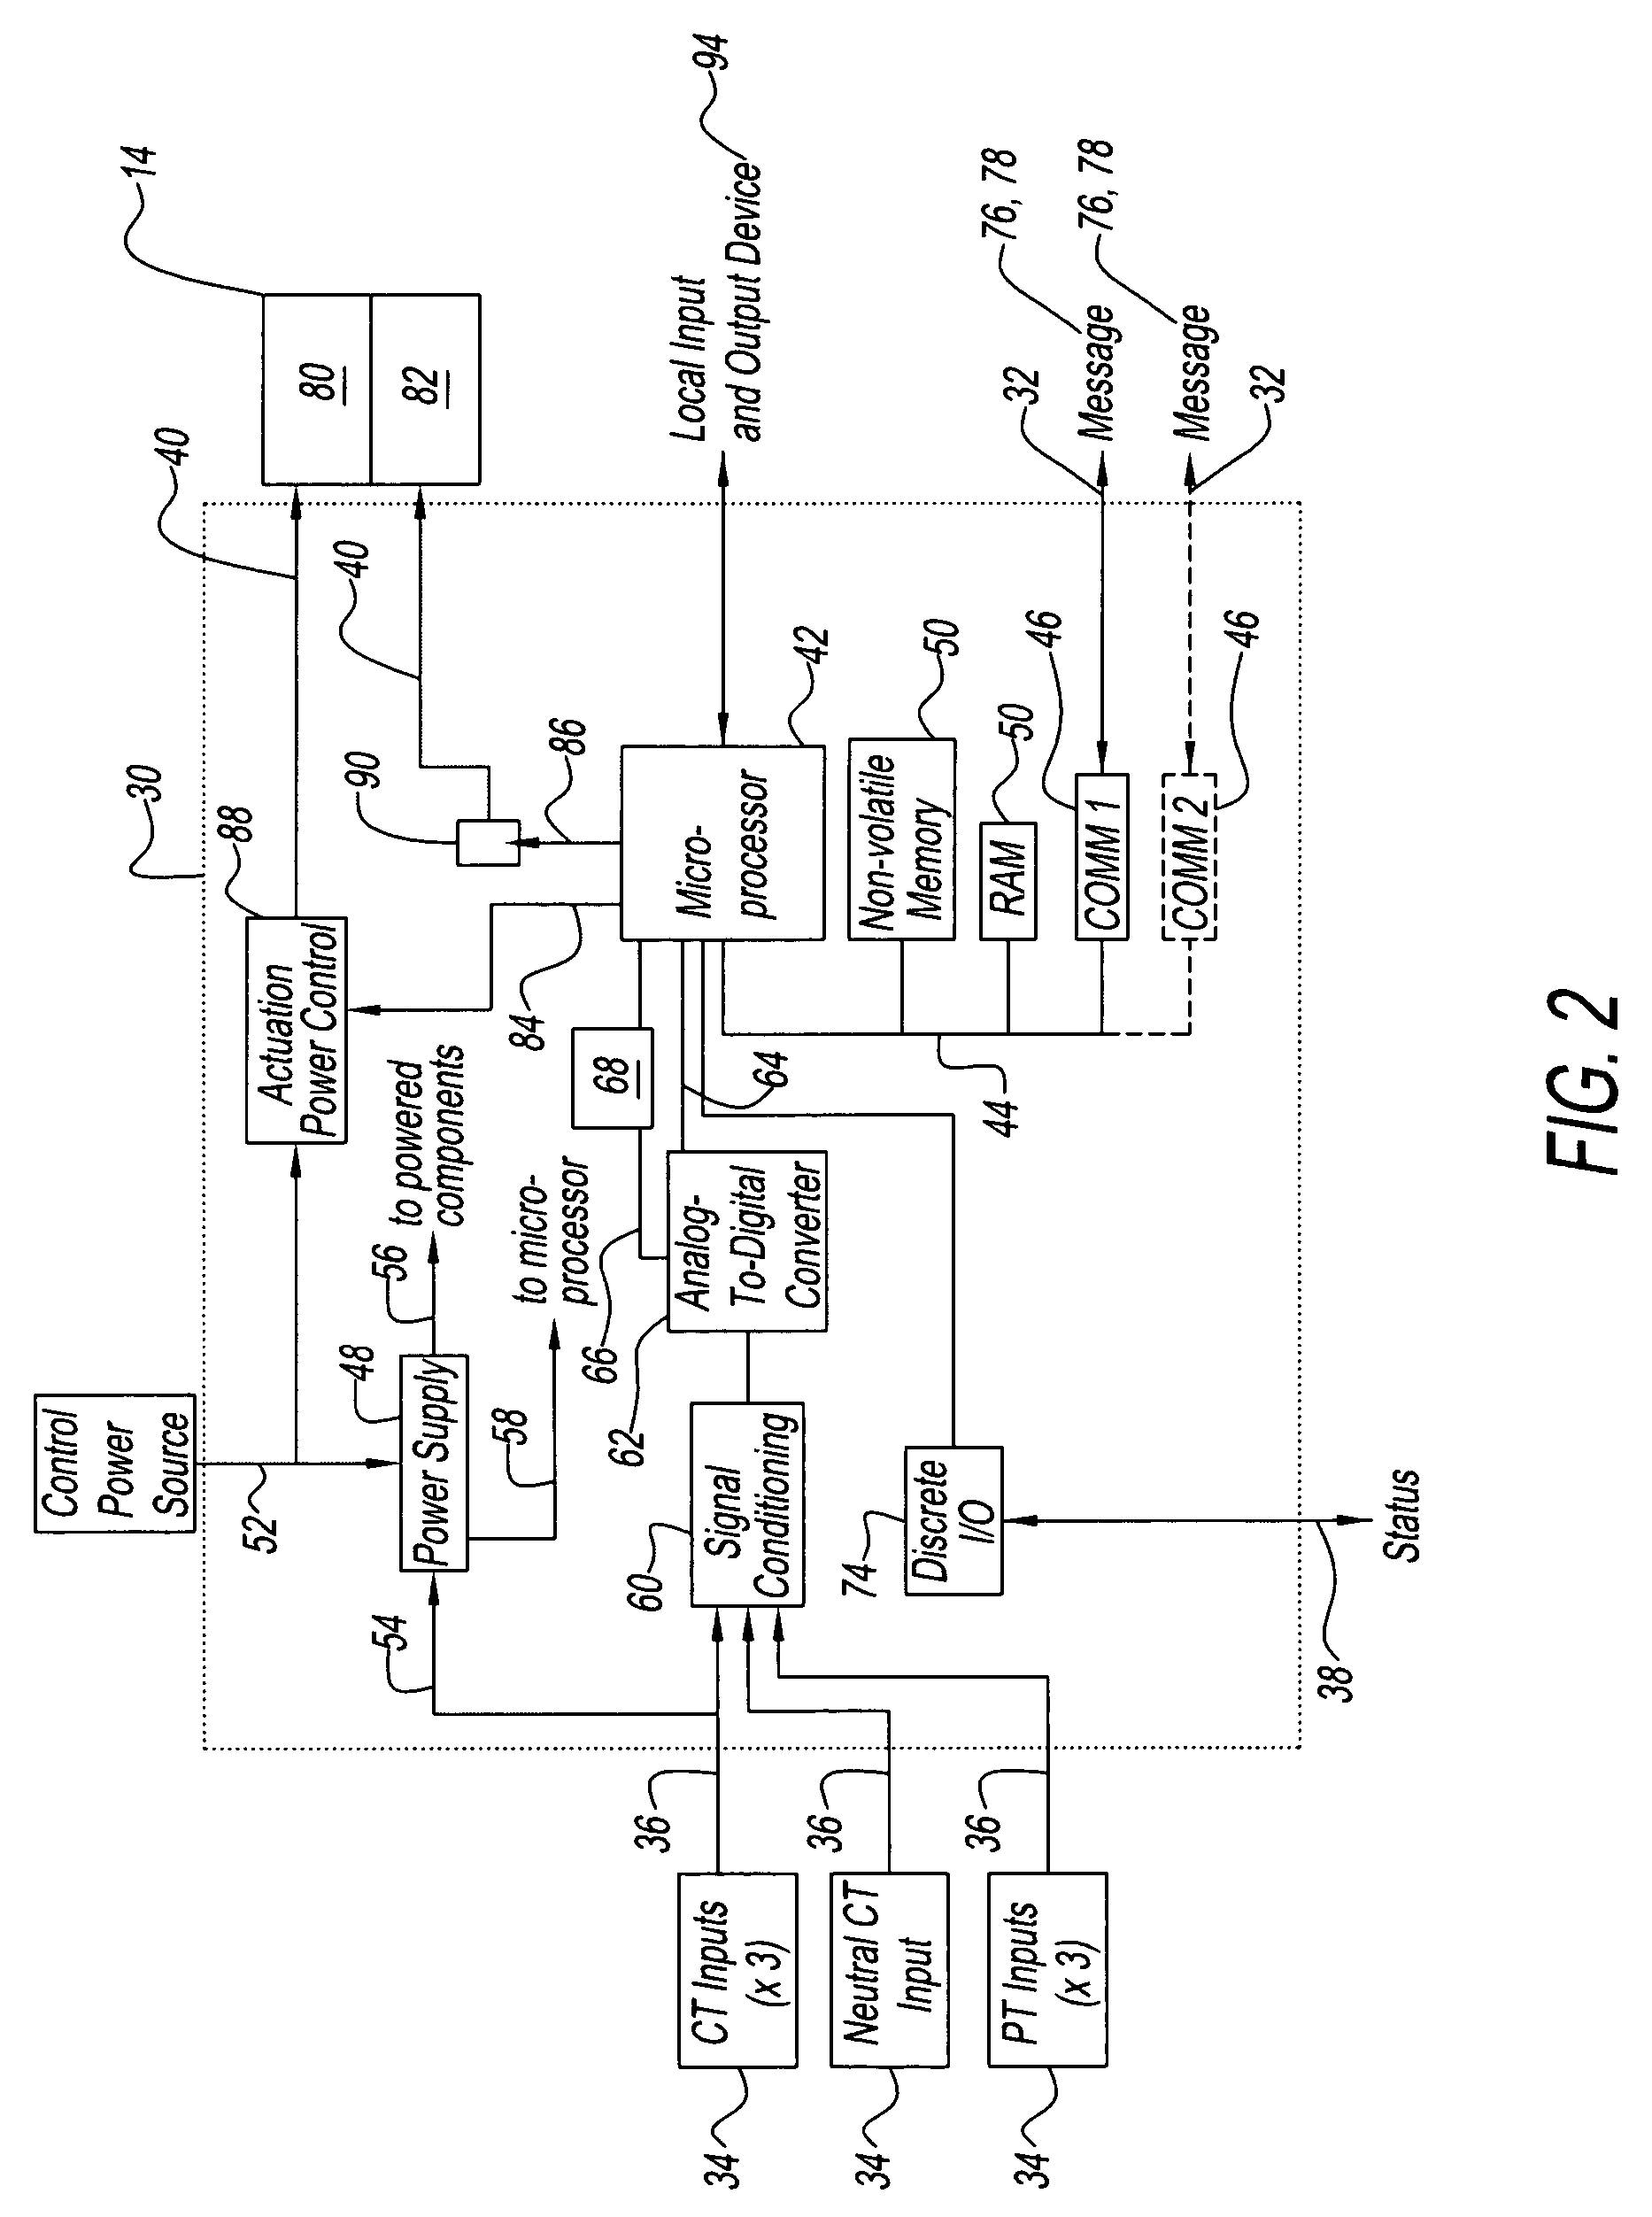 Circuit protection system